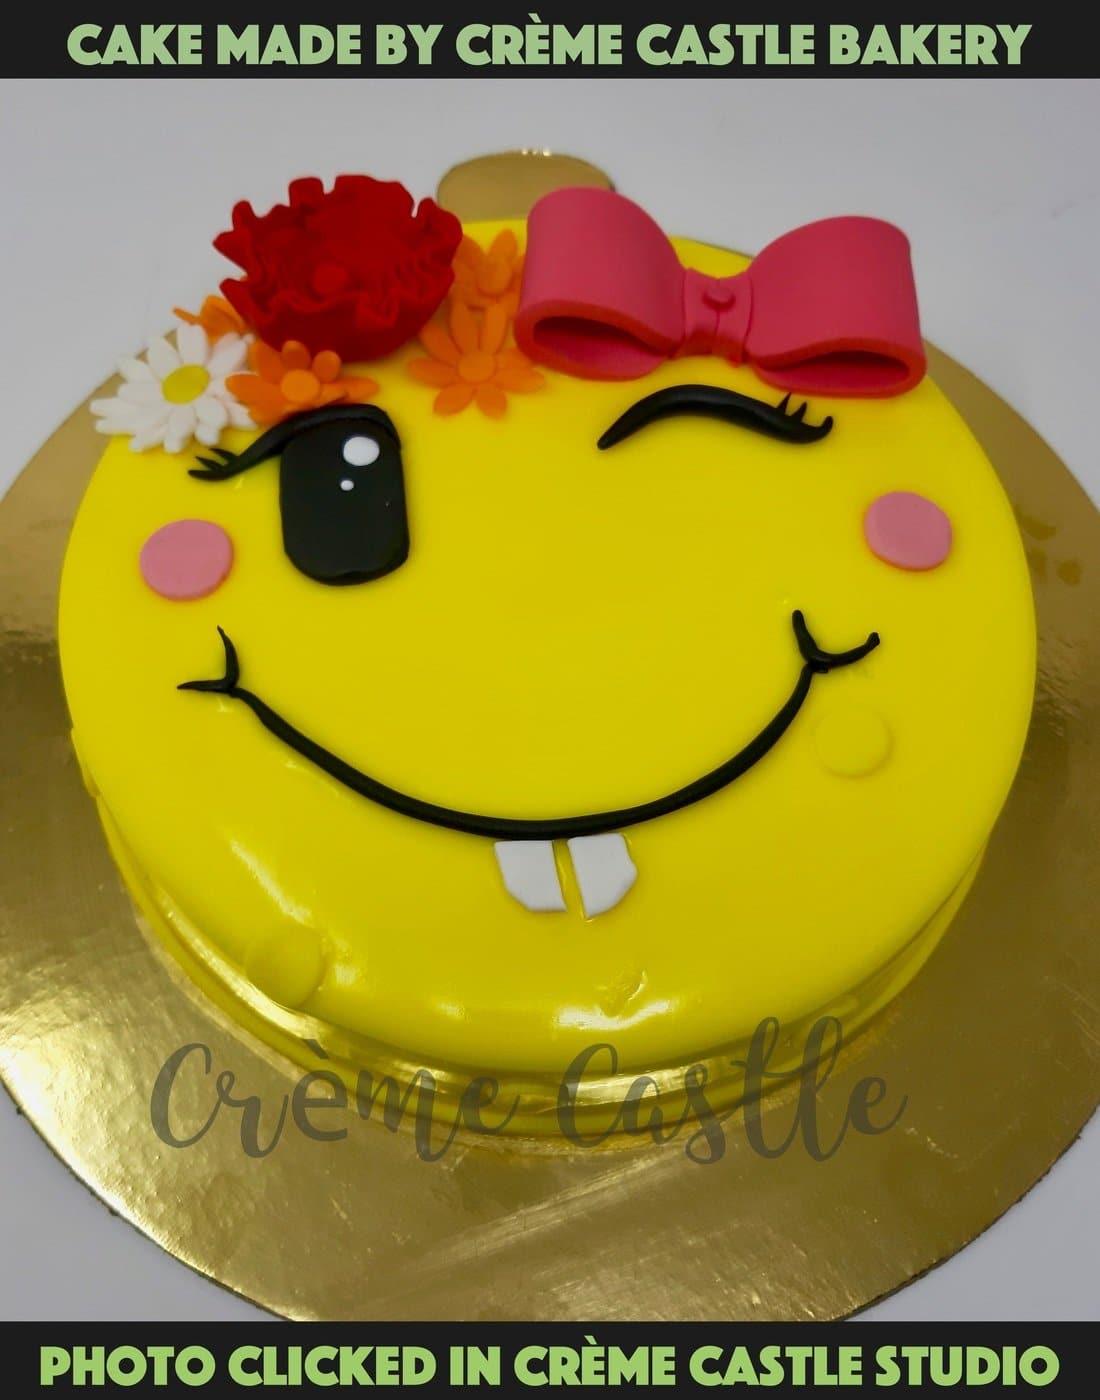 Birthday Cake for Girls and Boys | Upto Rs.300 OFF - FNP